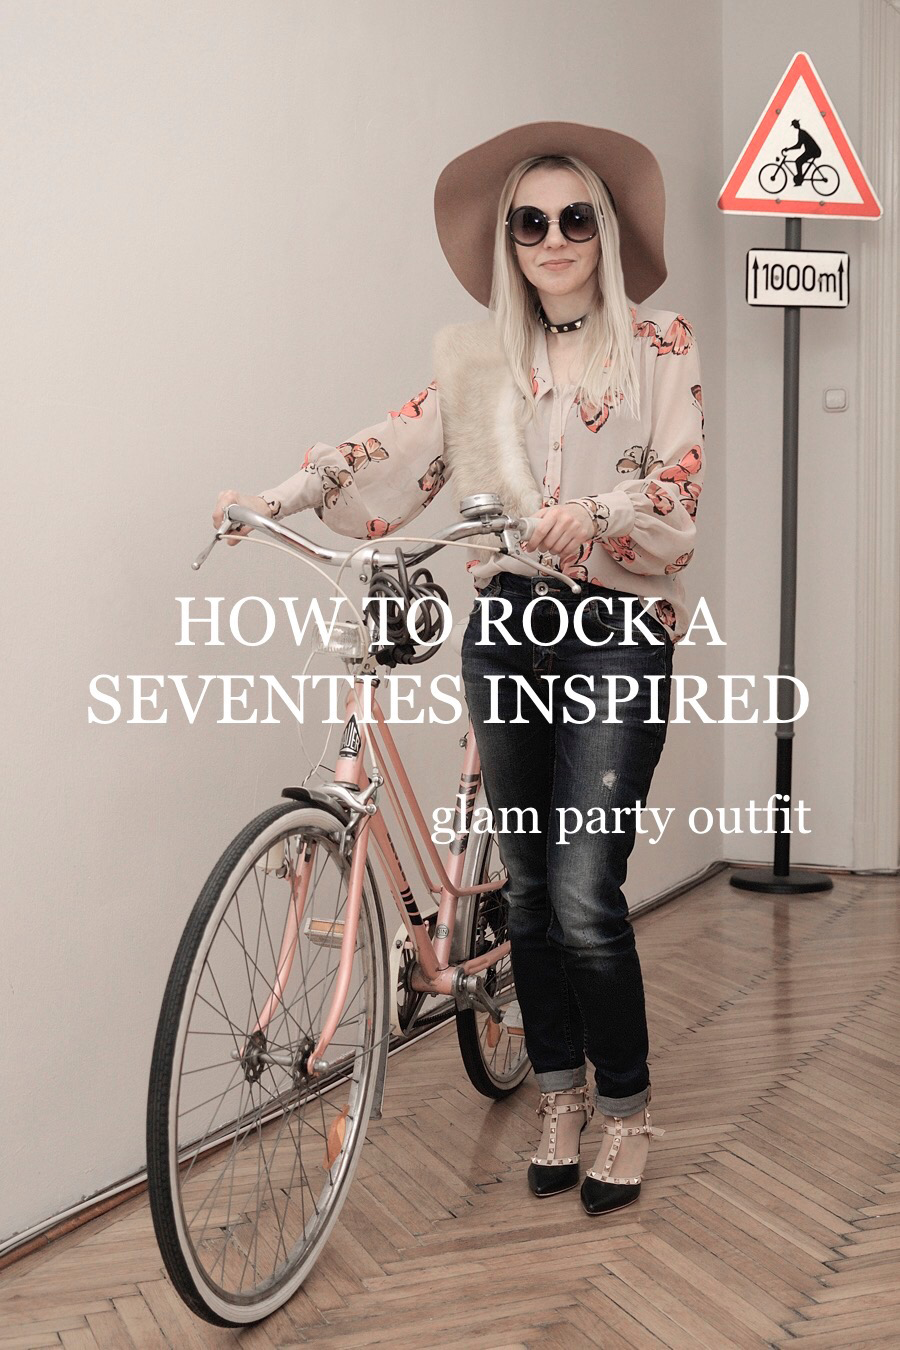 rock-seventies-inspired-glam-party-outfit-epic-street-style